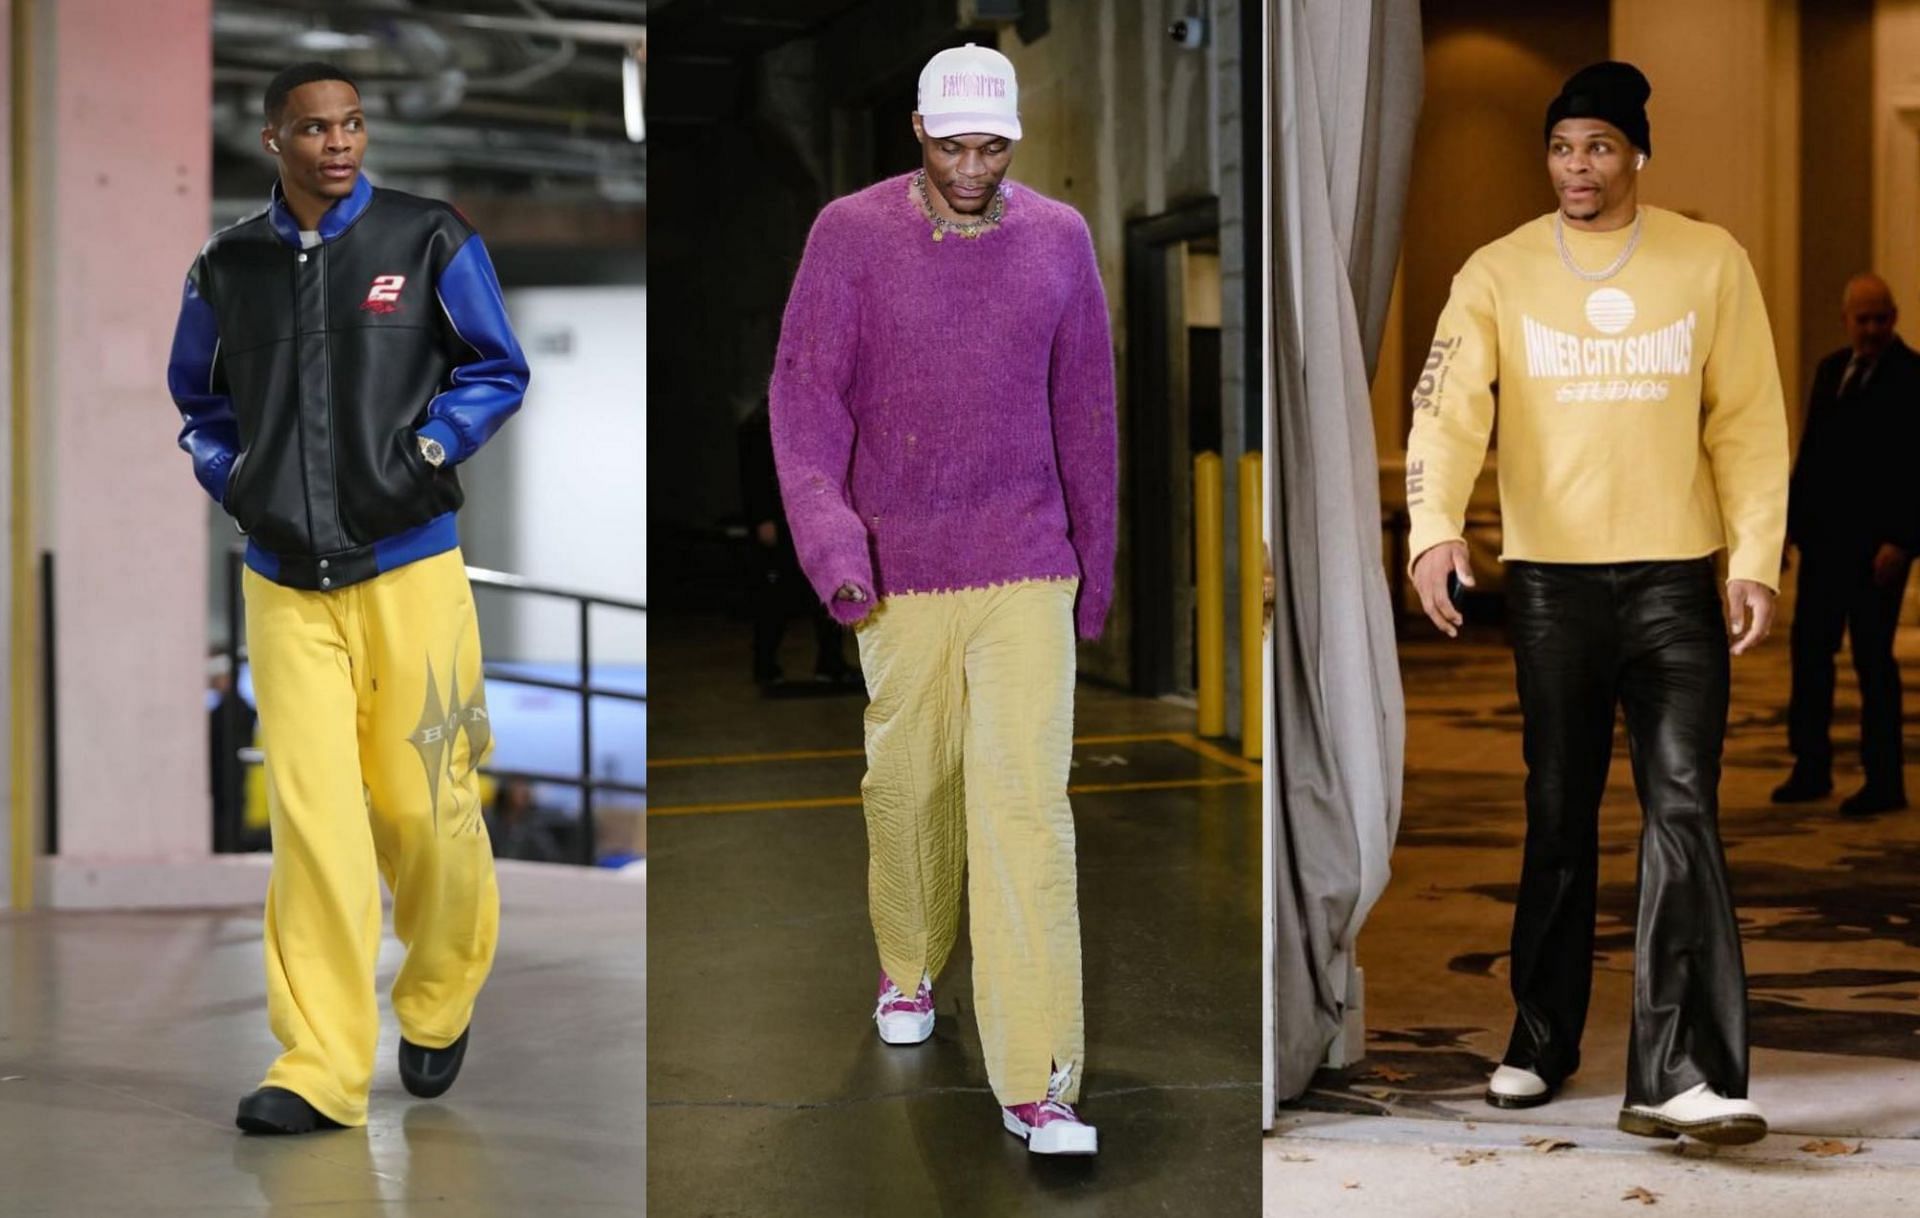 Russell Westbrook shows his love for the color yellow in his fashion choices